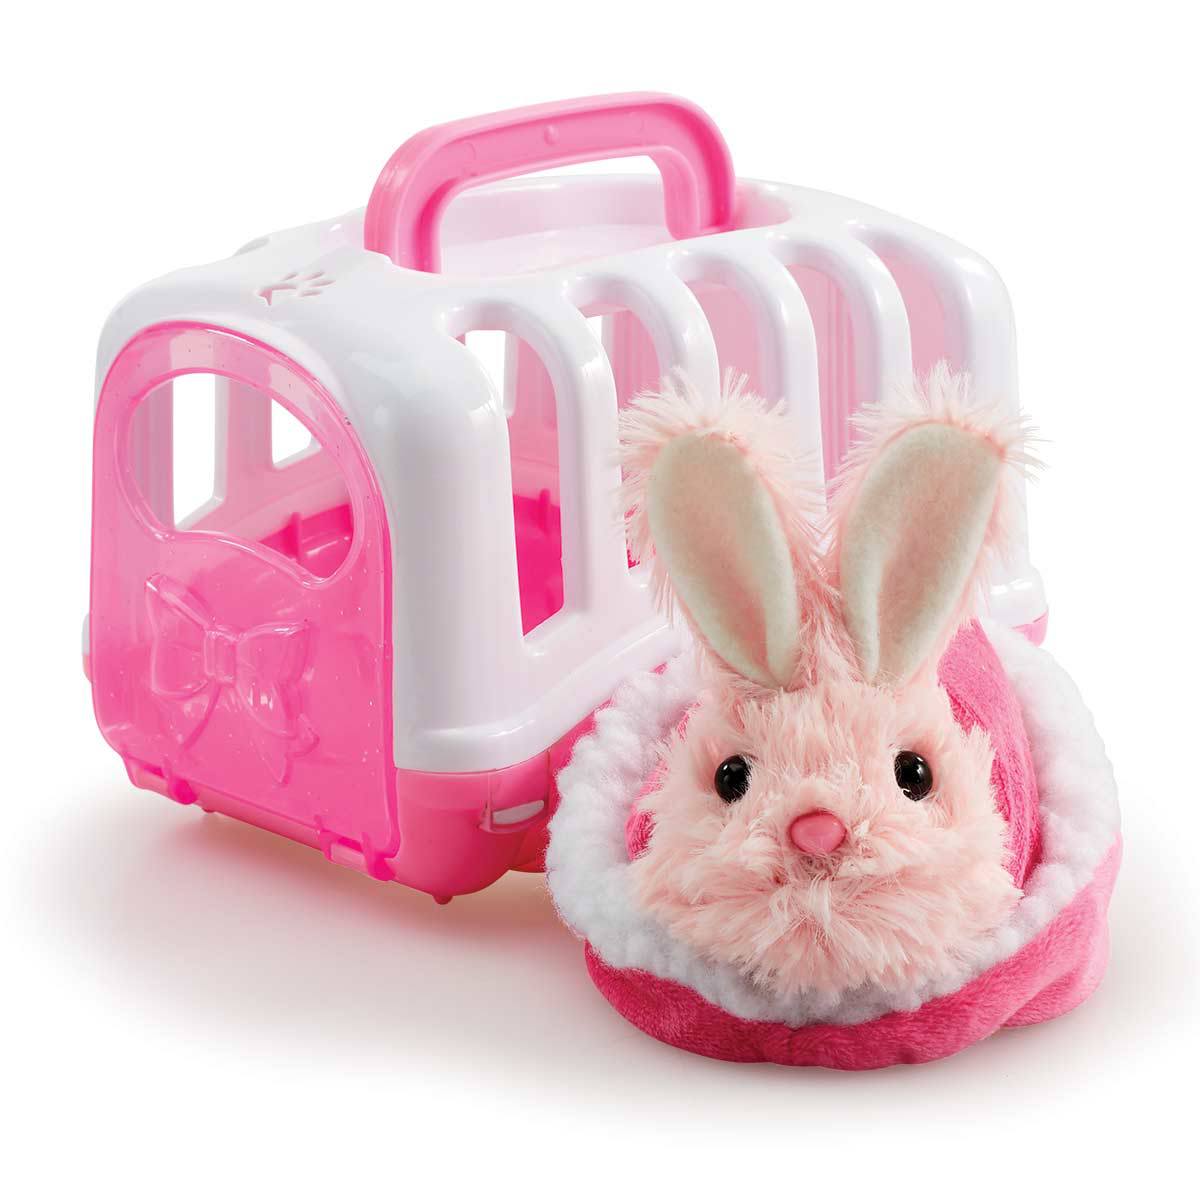 Pitter Patter Pets Carry Around Bunny (Styles Vary)